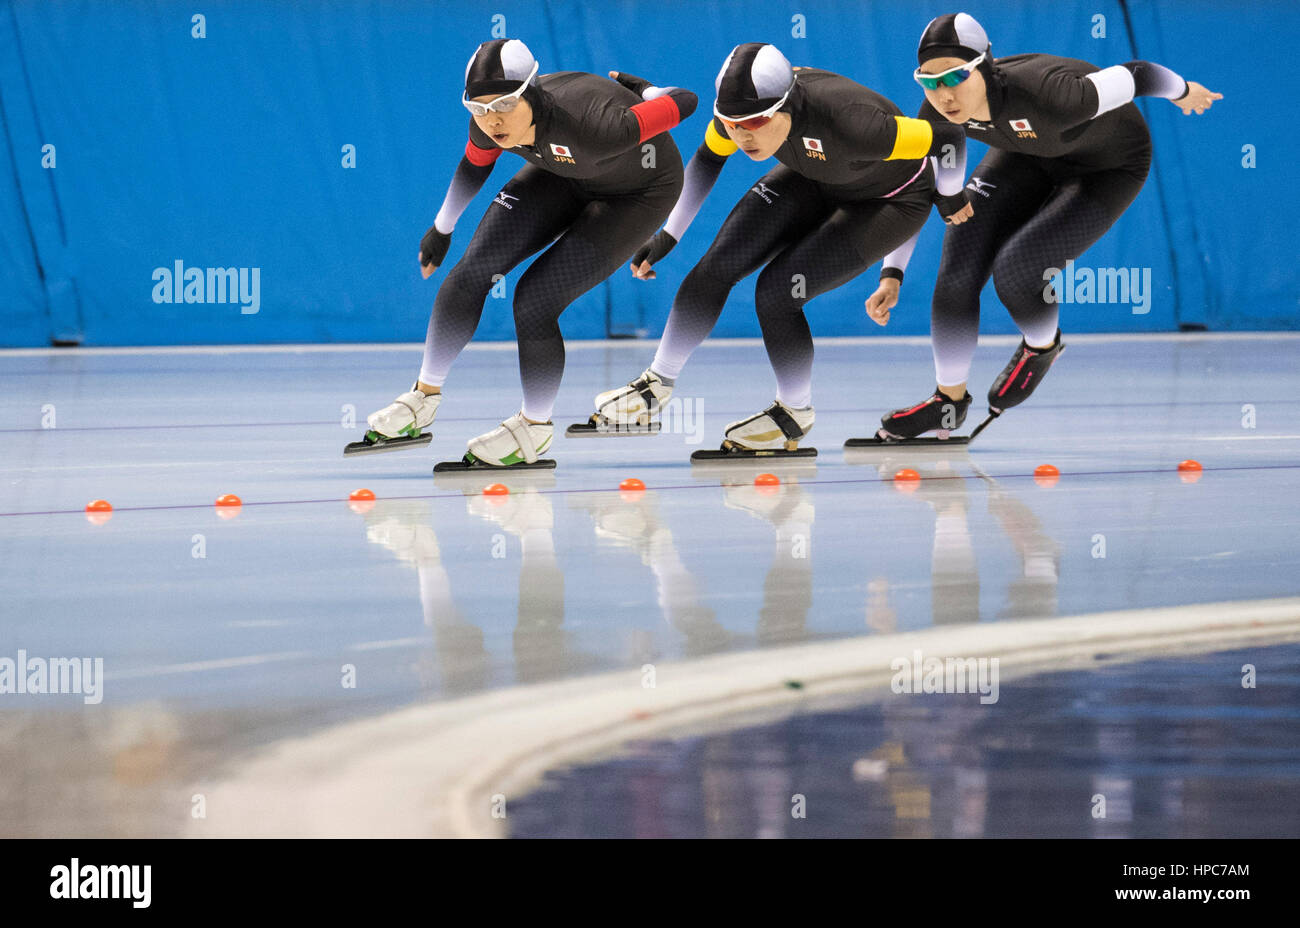 Obihiro, Japan. 21st Feb, 2017. Gold medalists Team Japan compete during the Ladies' Team Pursuit at the 2017 Sapporo Asian Winter Games in Obihiro, Japan, Feb. 21, 2017. Credit: Jiang Wenyao/Xinhua/Alamy Live News Stock Photo